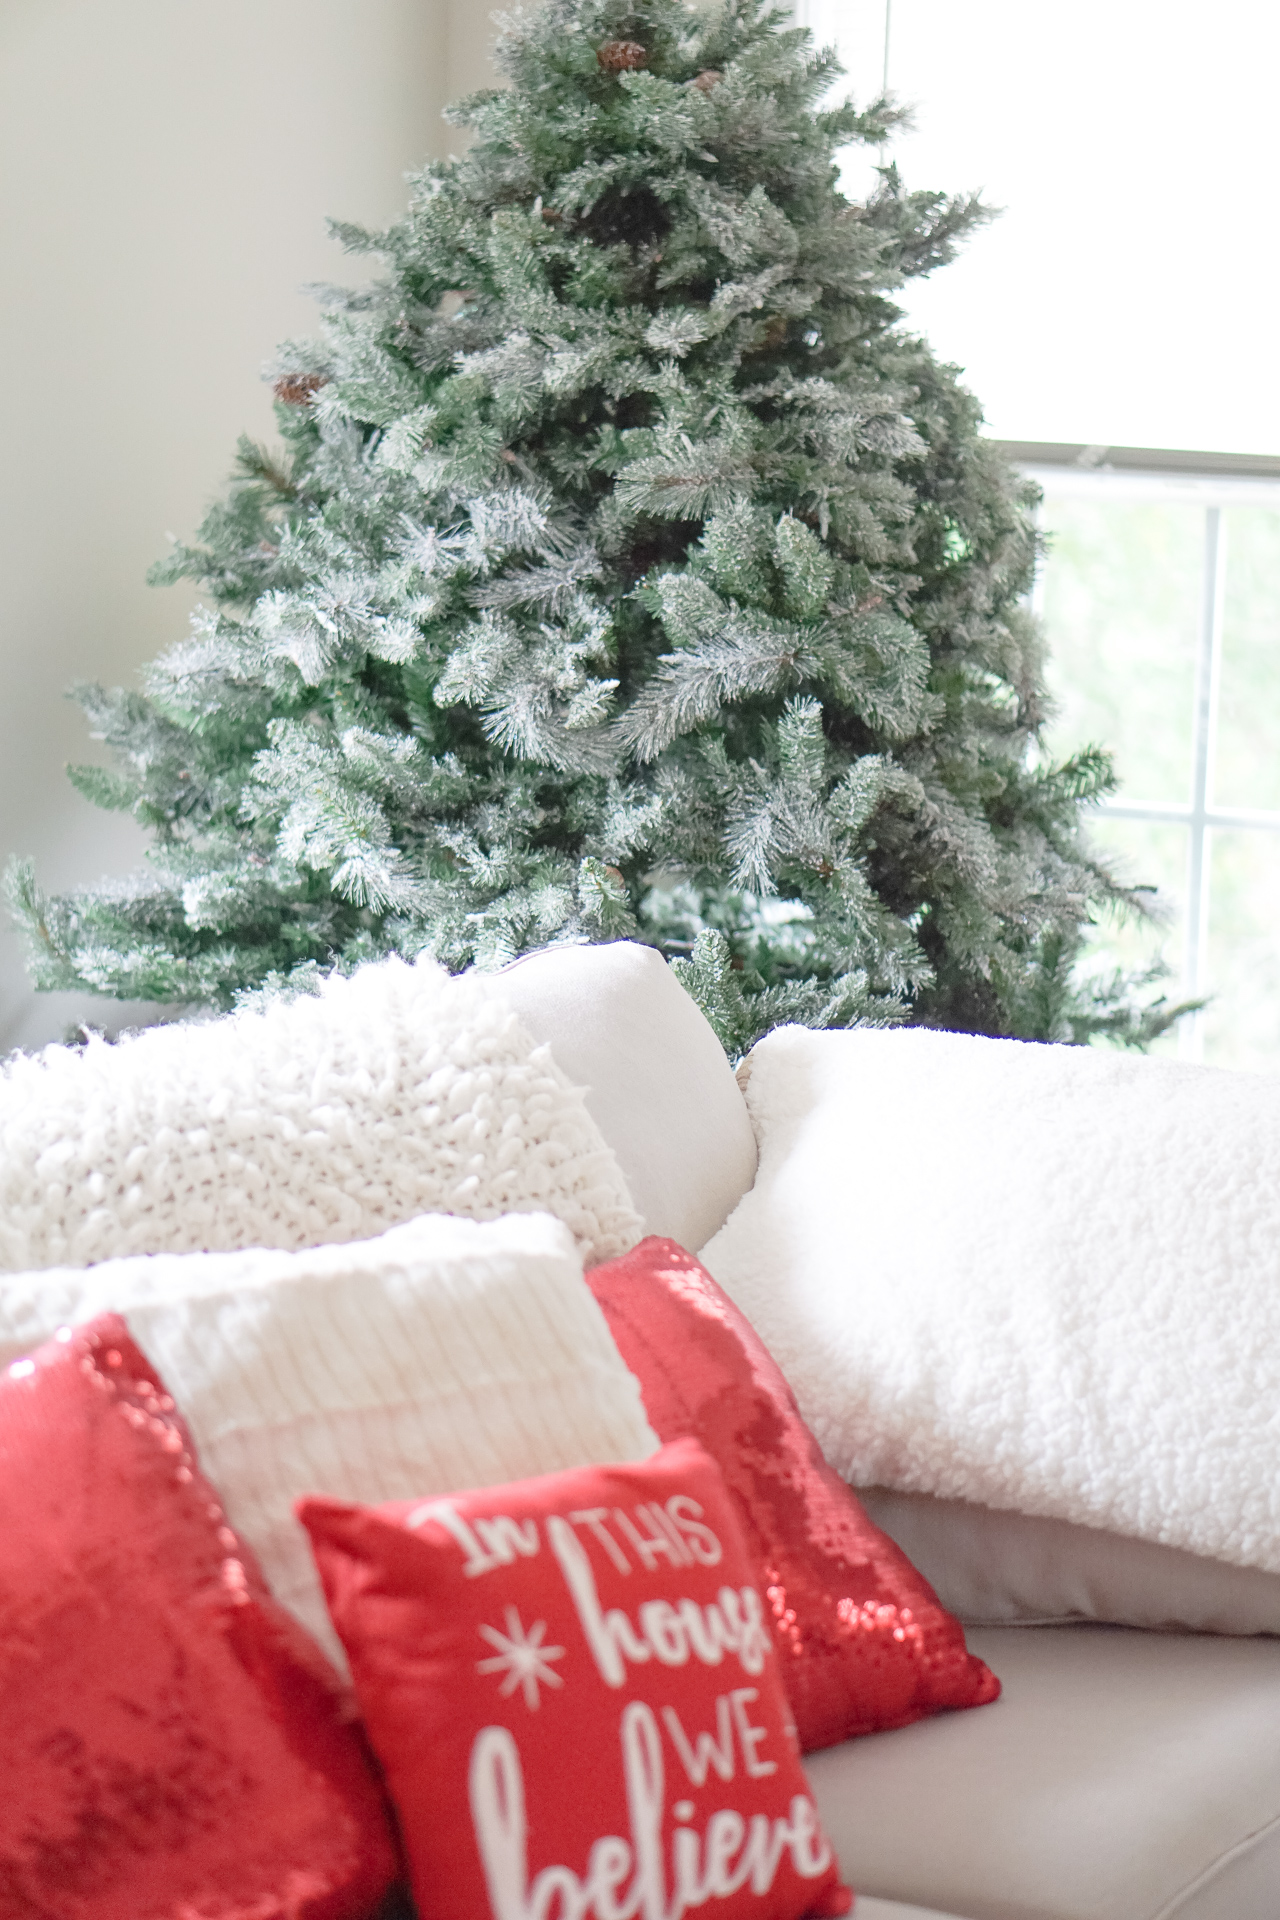 Artificial Christmas Tree - Holiday Decor All Around the House - Christmas Tree Ideas via Misty Nelson, frostedblog @frostedevents.com 